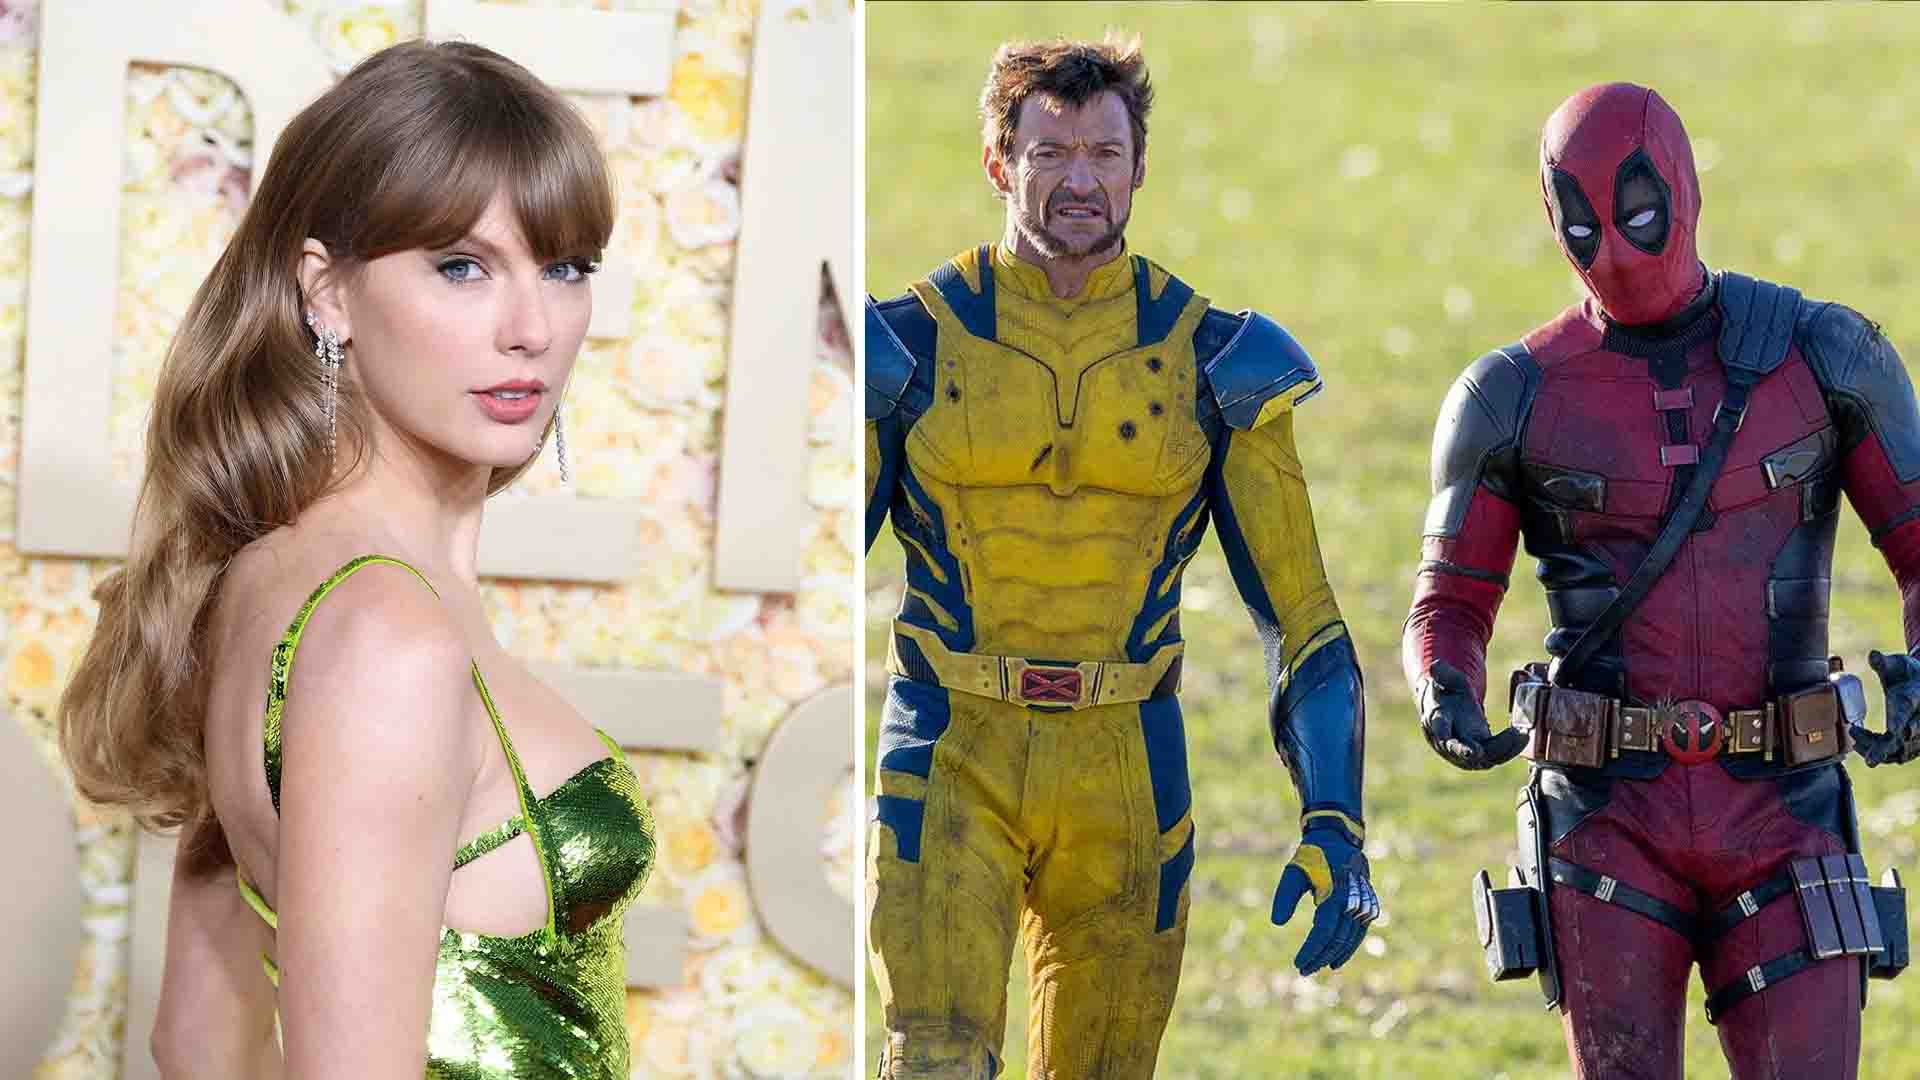 Will Be See Taylor Swift in Deadpool & Wolverine!